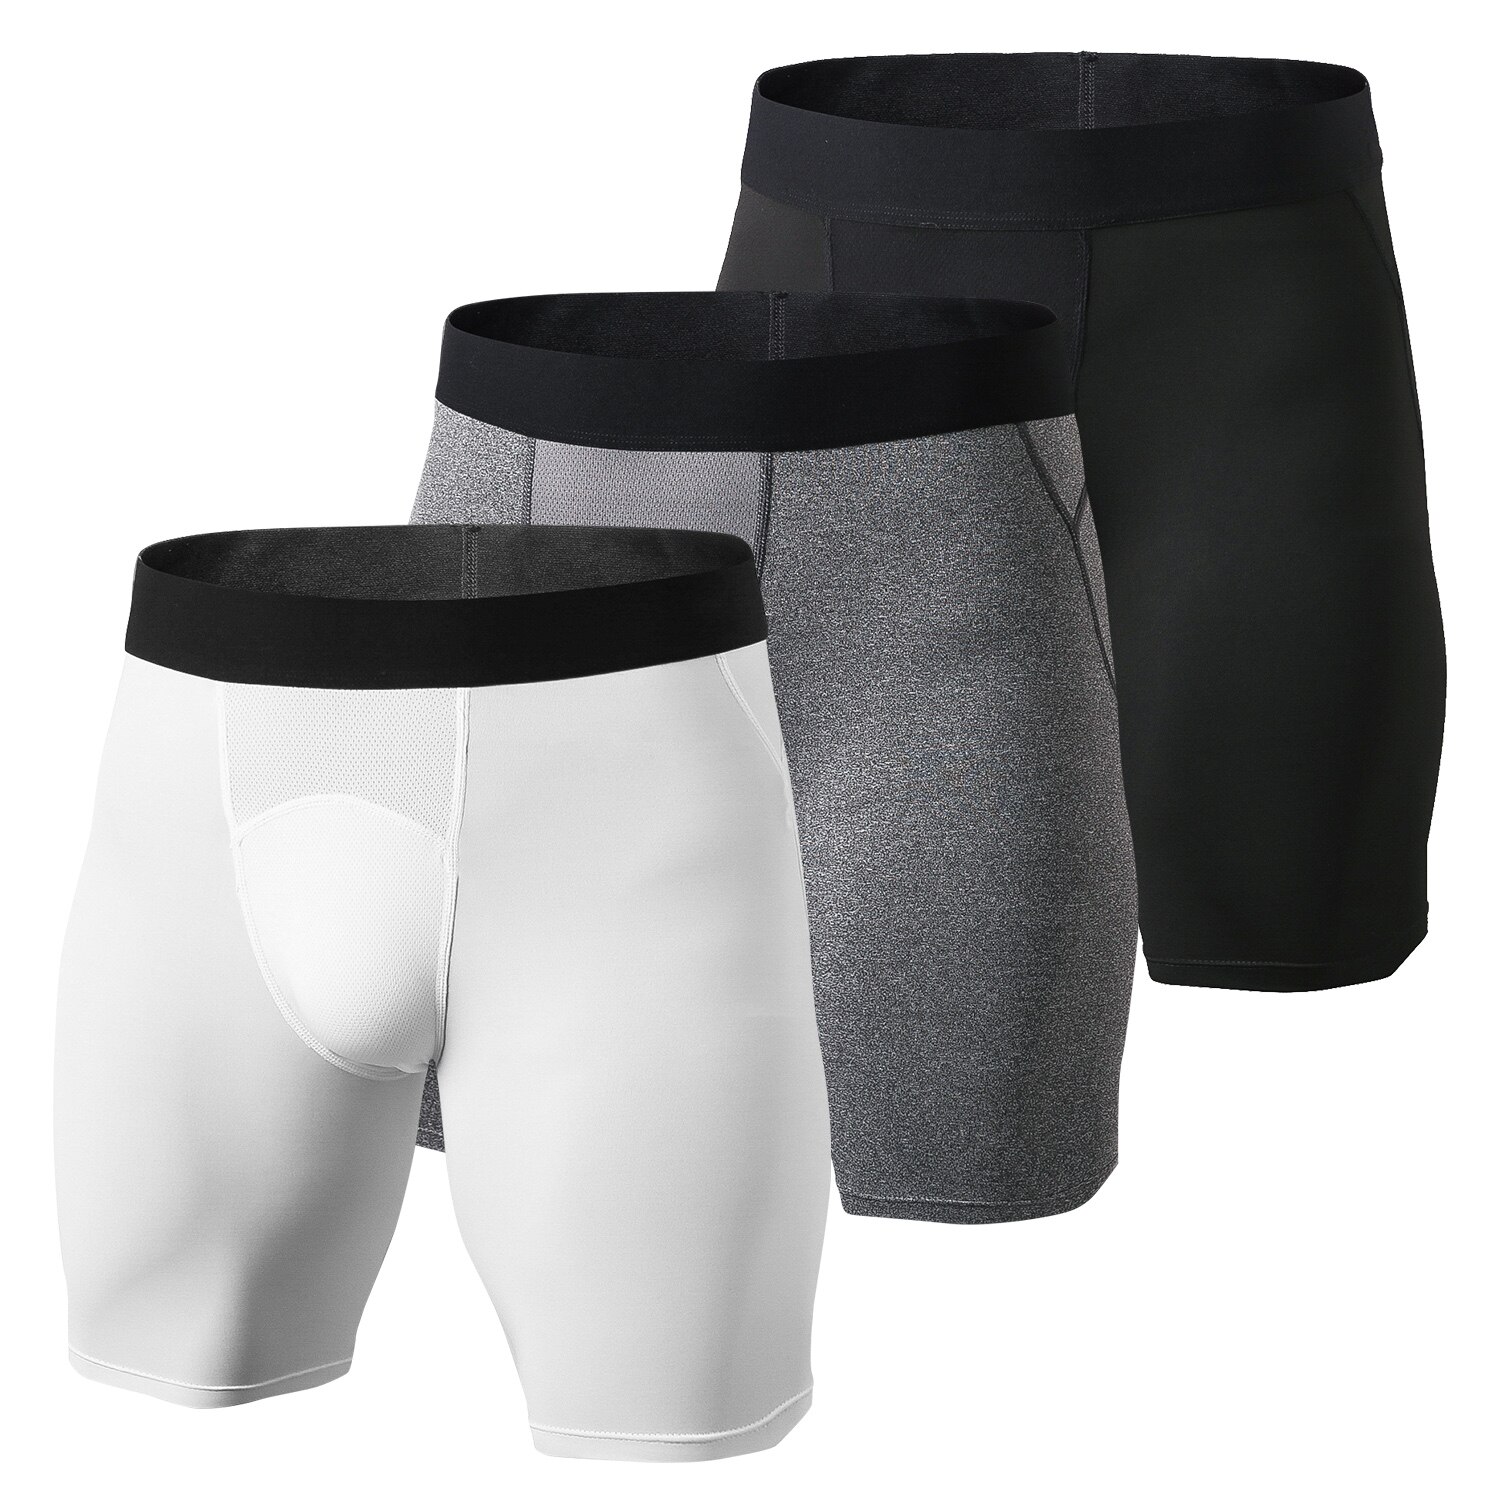 3 Pack Men Sports Underwear Breathable Boxing Briefs Men Compression Shorts Fitness Cycling Quick-drying Stretch Shorts